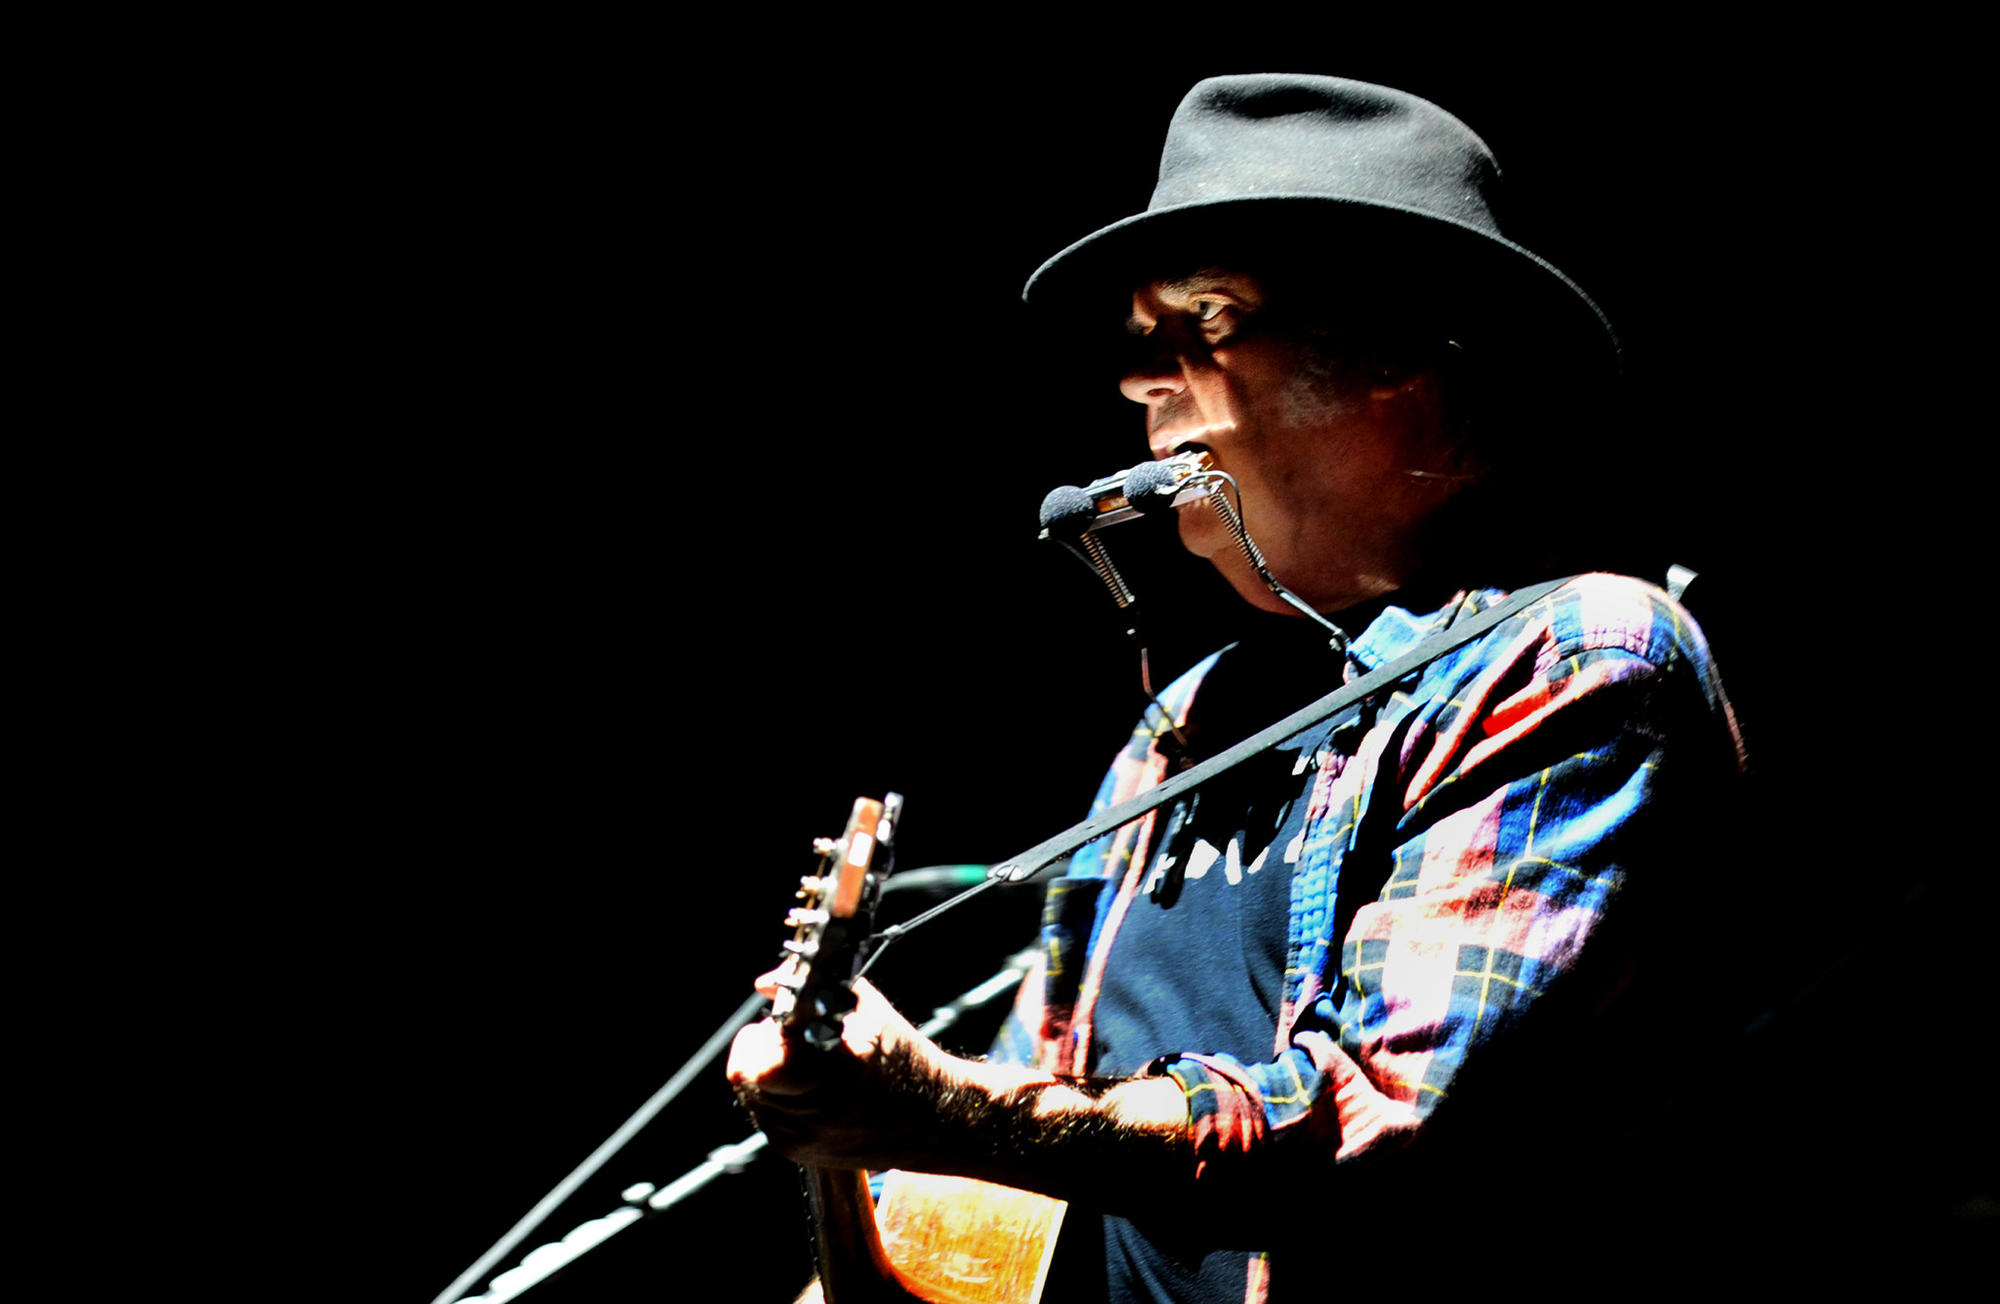 Neil Young performing in 2015 at the Forum in Inglewood.